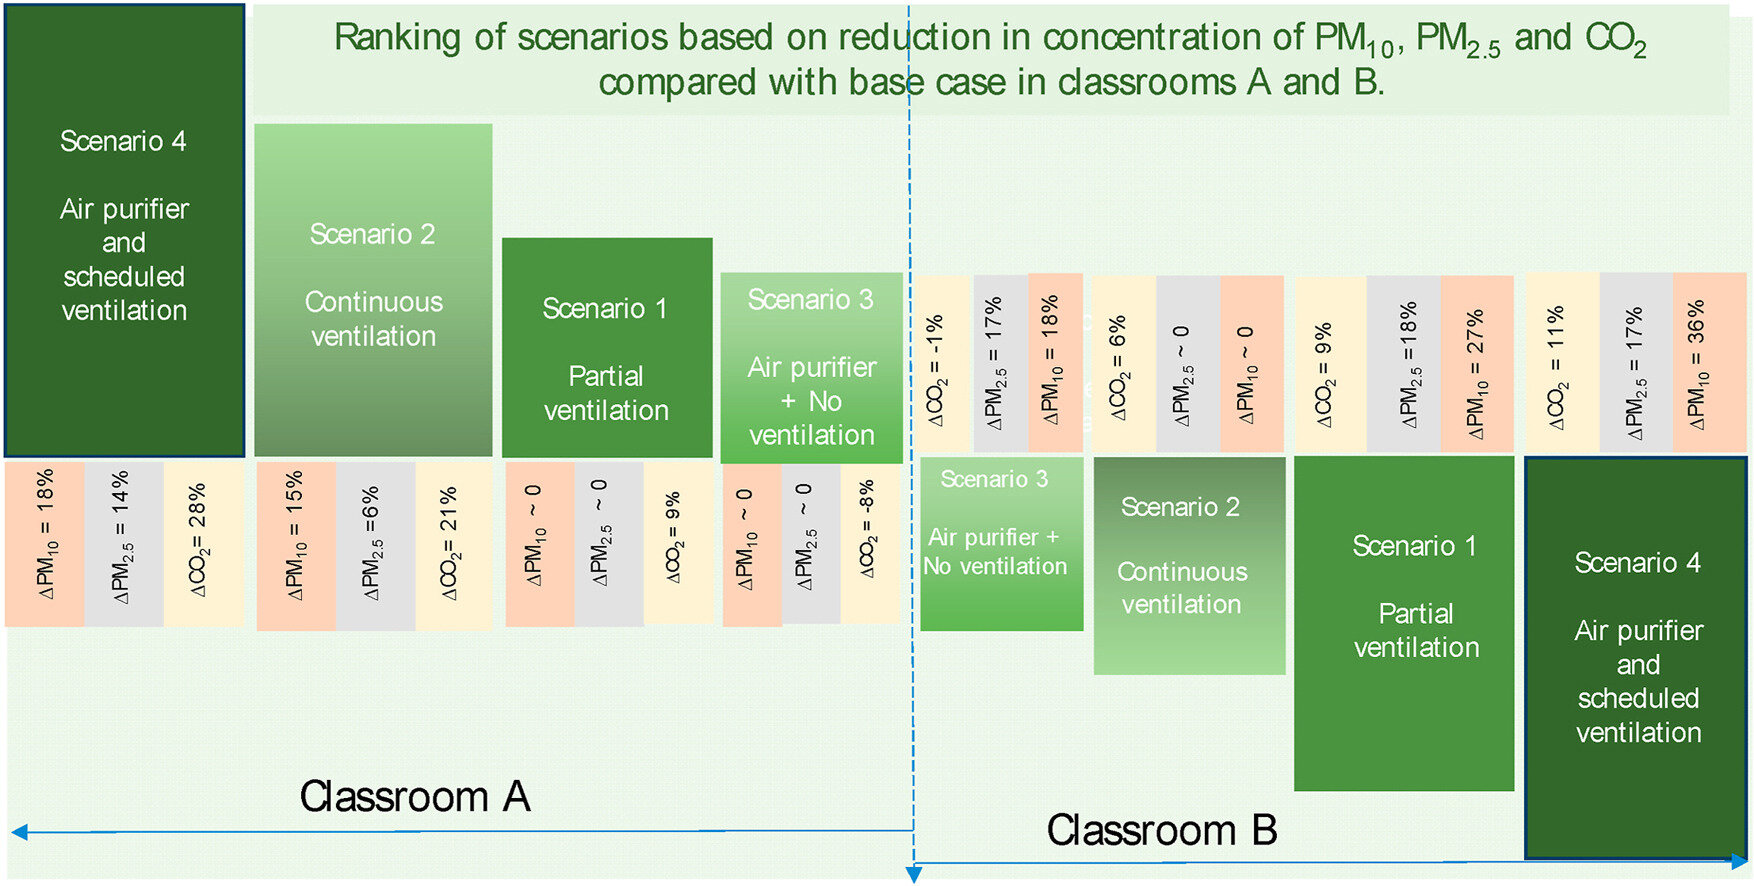 #Air filters and scheduled window opening can reduce classroom pollution by up to 36%: Study